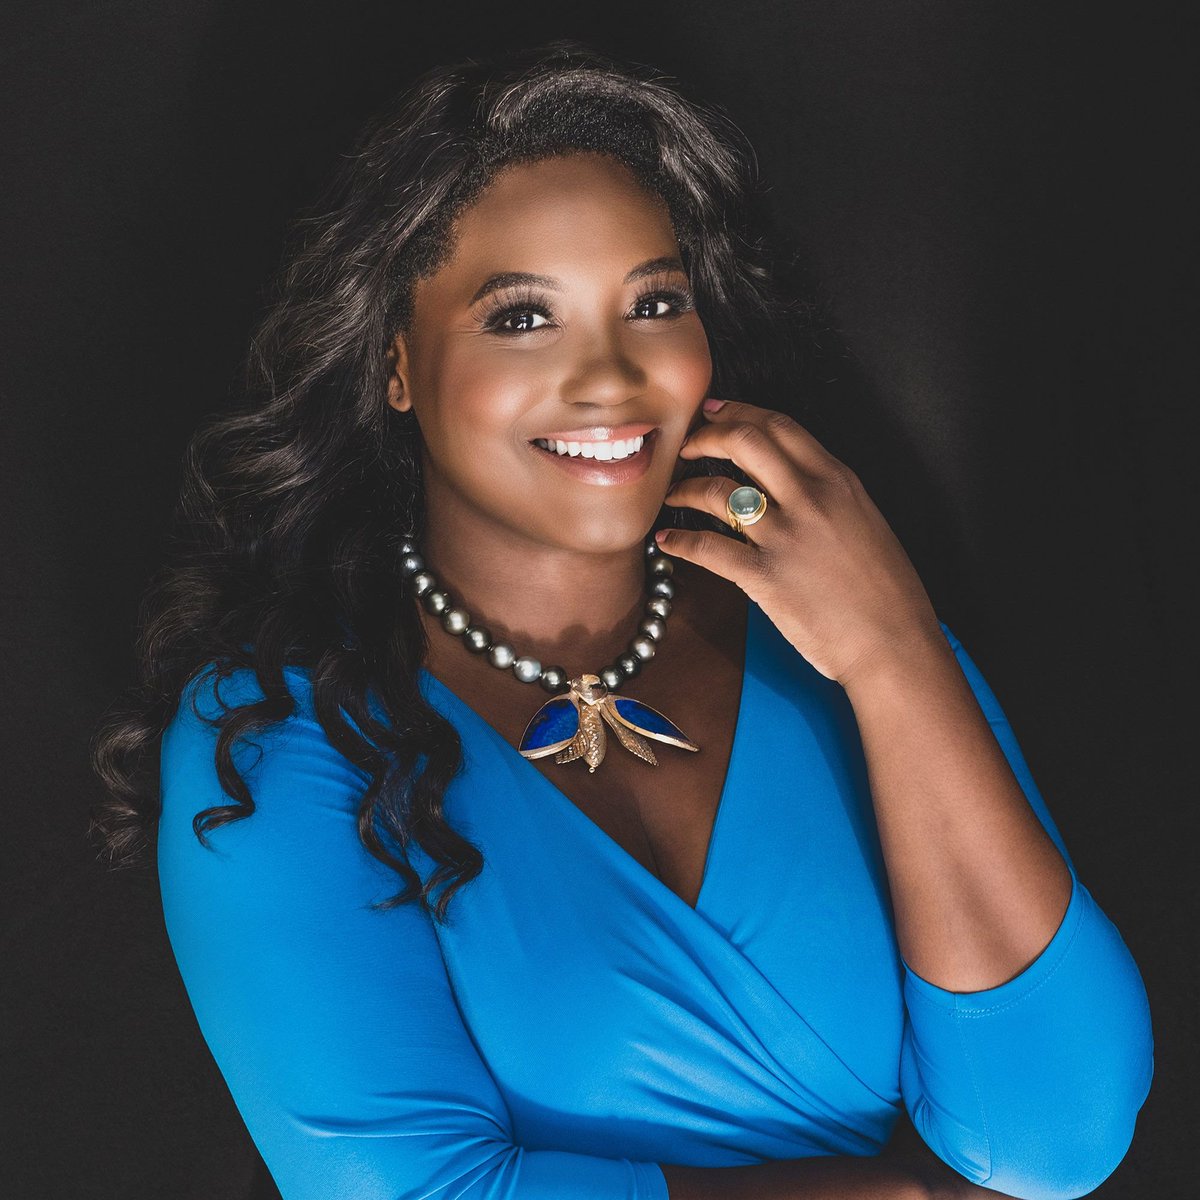 Soprano Angel Blue will be performing a recital tonight with the Aspen Music Festival (@aspenmusic)!

#Soprano #Opera #OperaSinger #Aspen #Festival #AspenMusicFestival https://t.co/eZJmwO2JTu